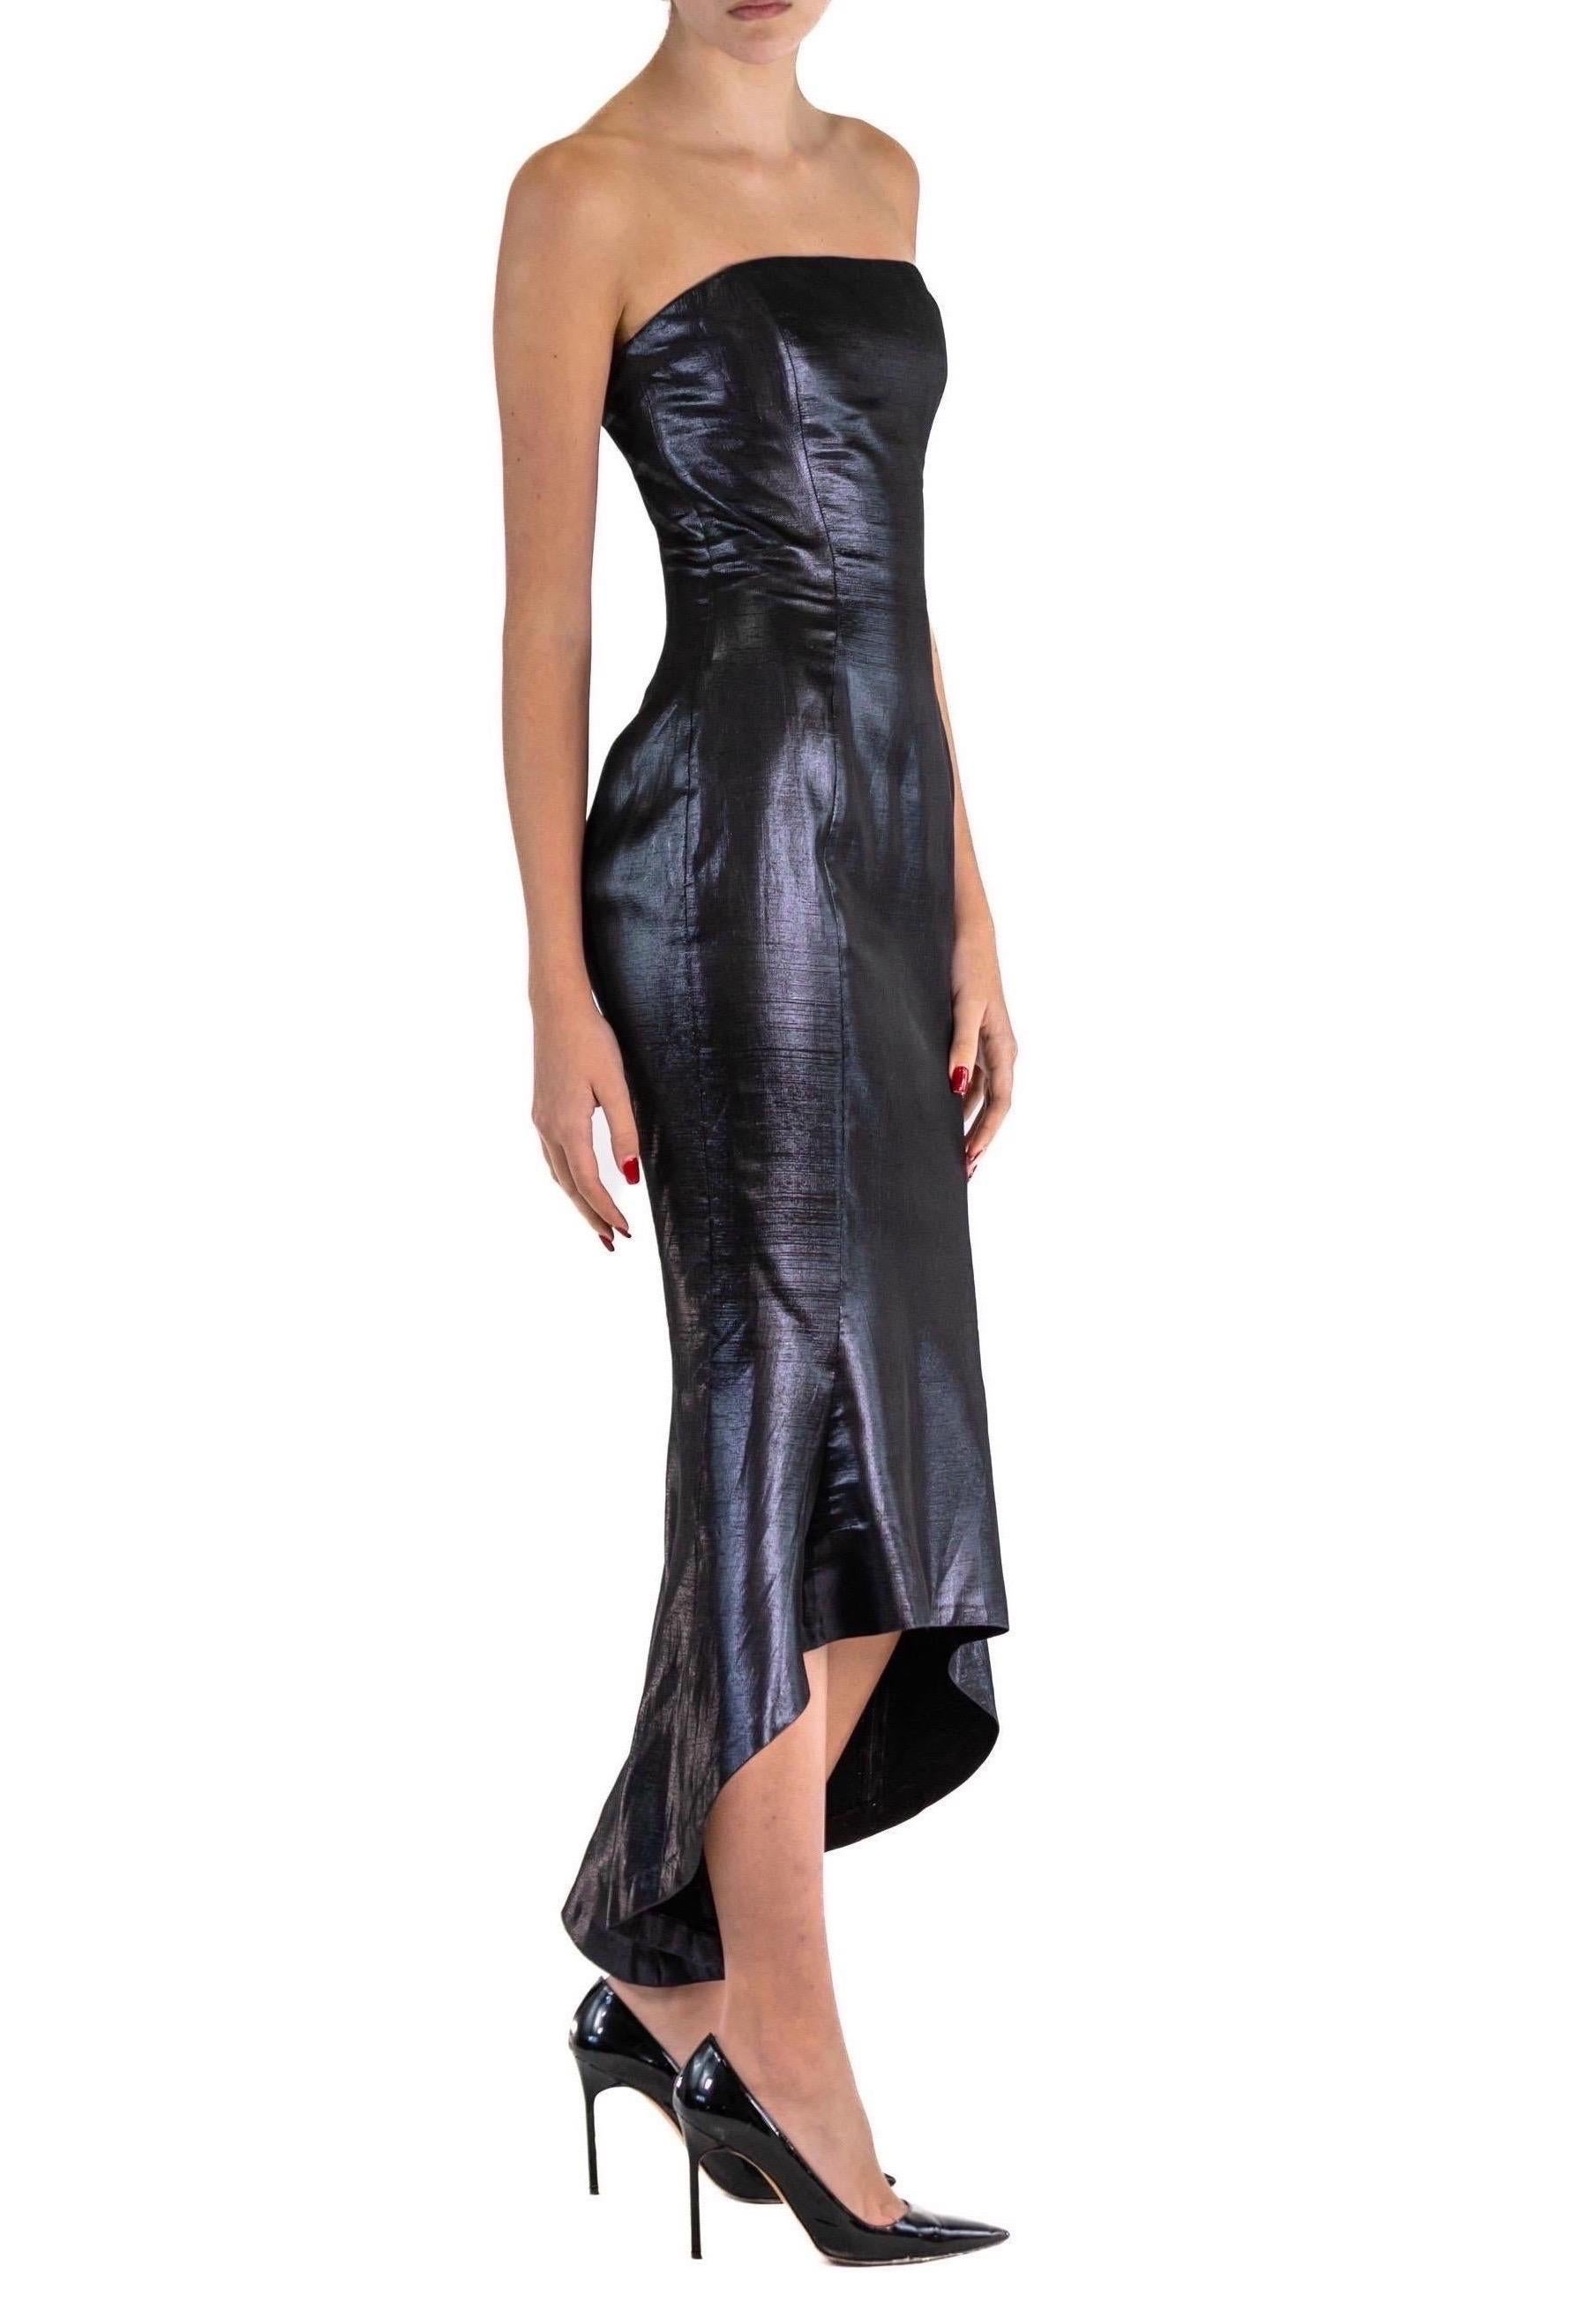 1990S Black Metallic Silk Strapless Gown With Fishtail Hem For Sale 3